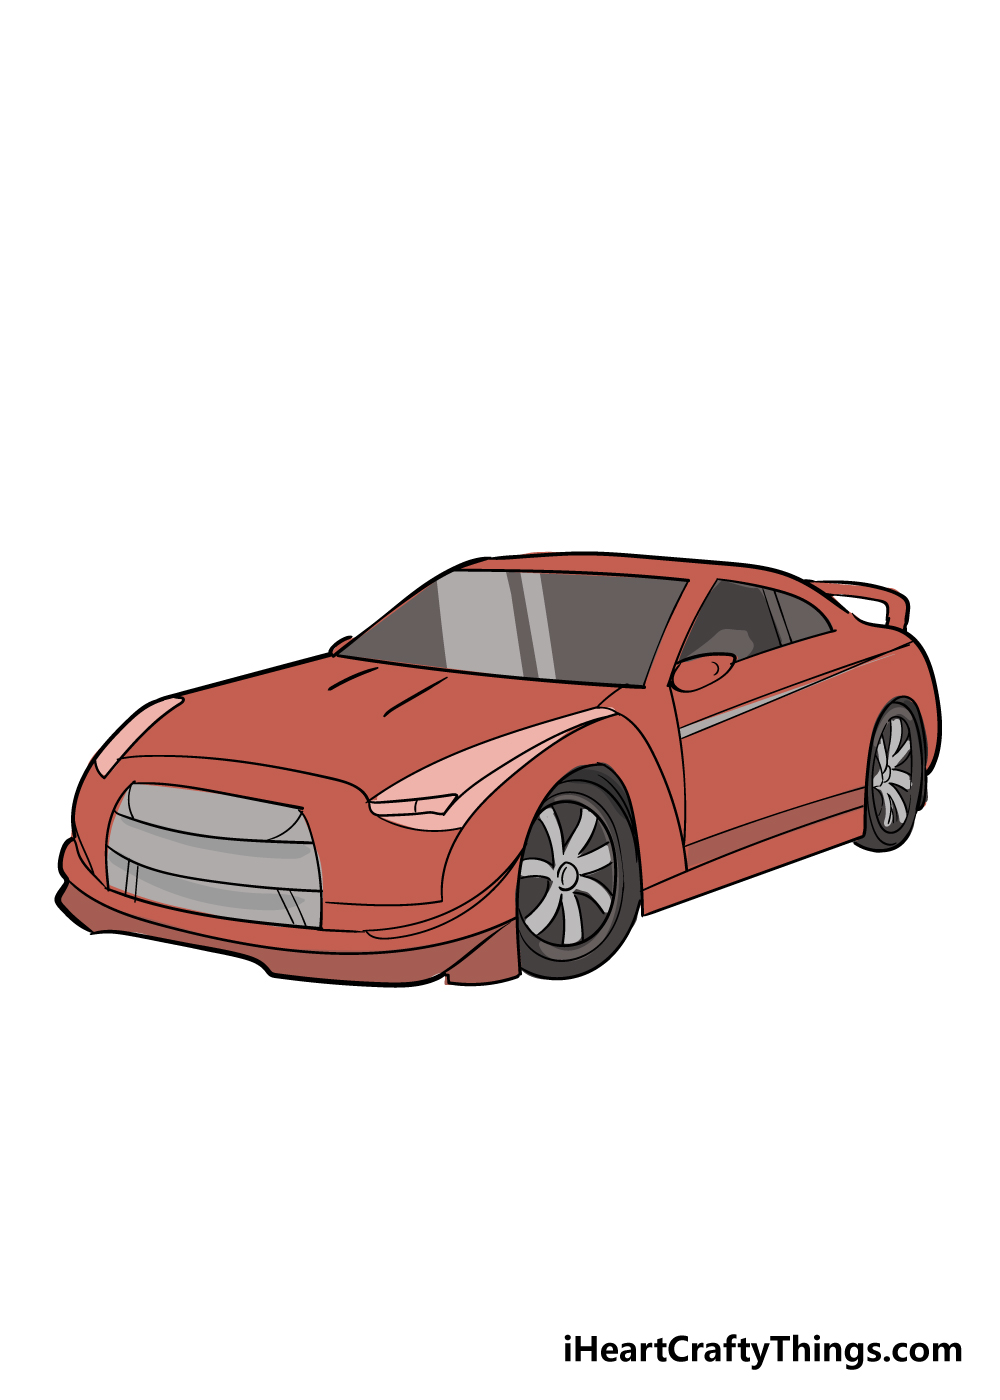 Racecar Drawing - How To Draw A Racecar Step By Step